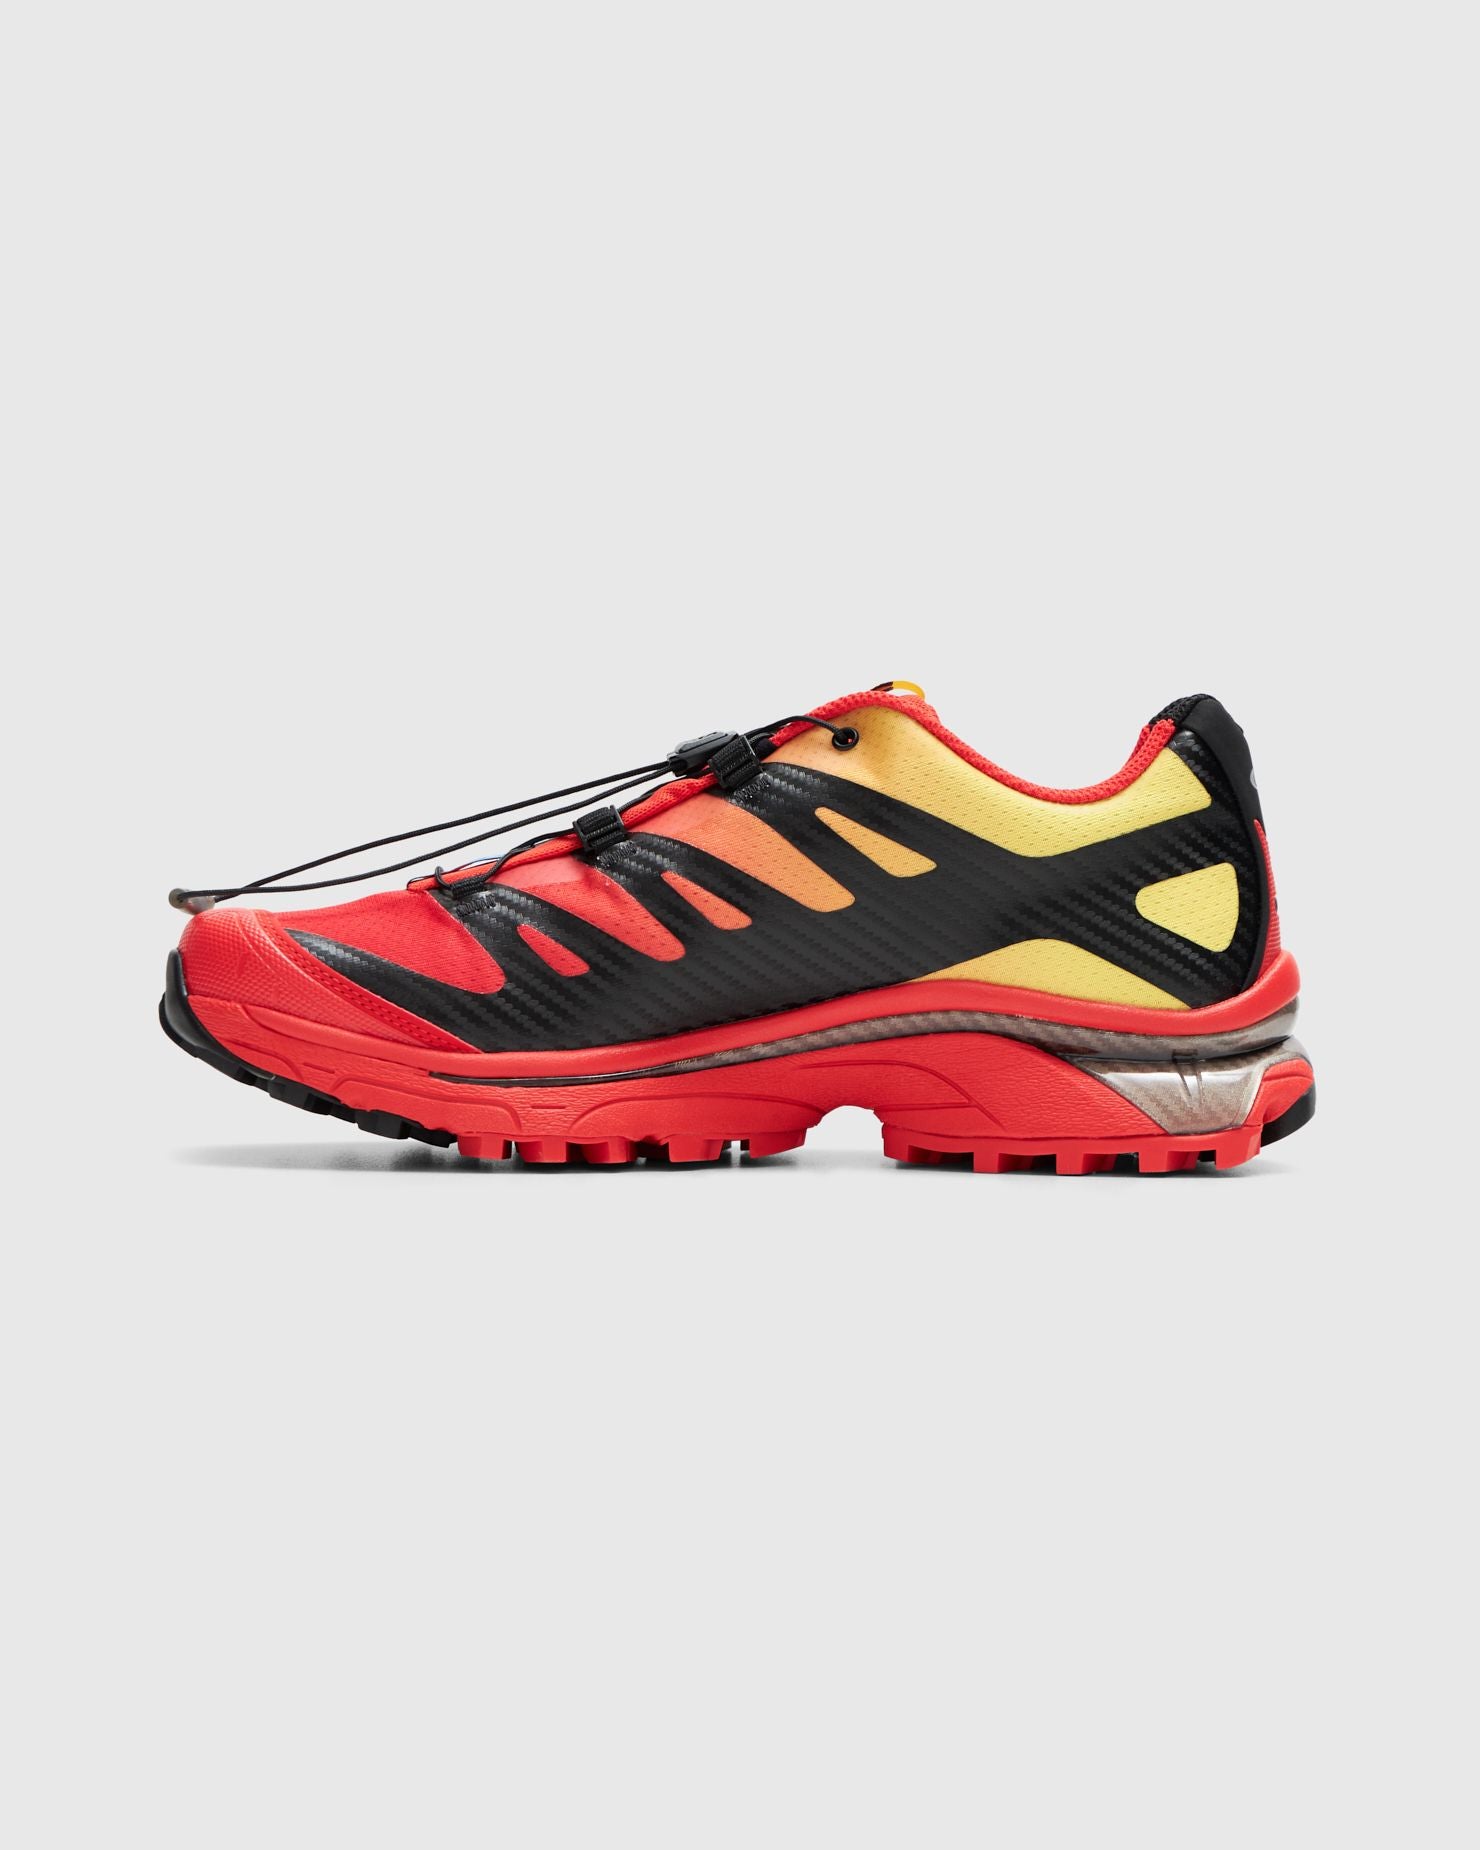 XT-4 OG in Fiery Red/ Black/ Empire Yellow